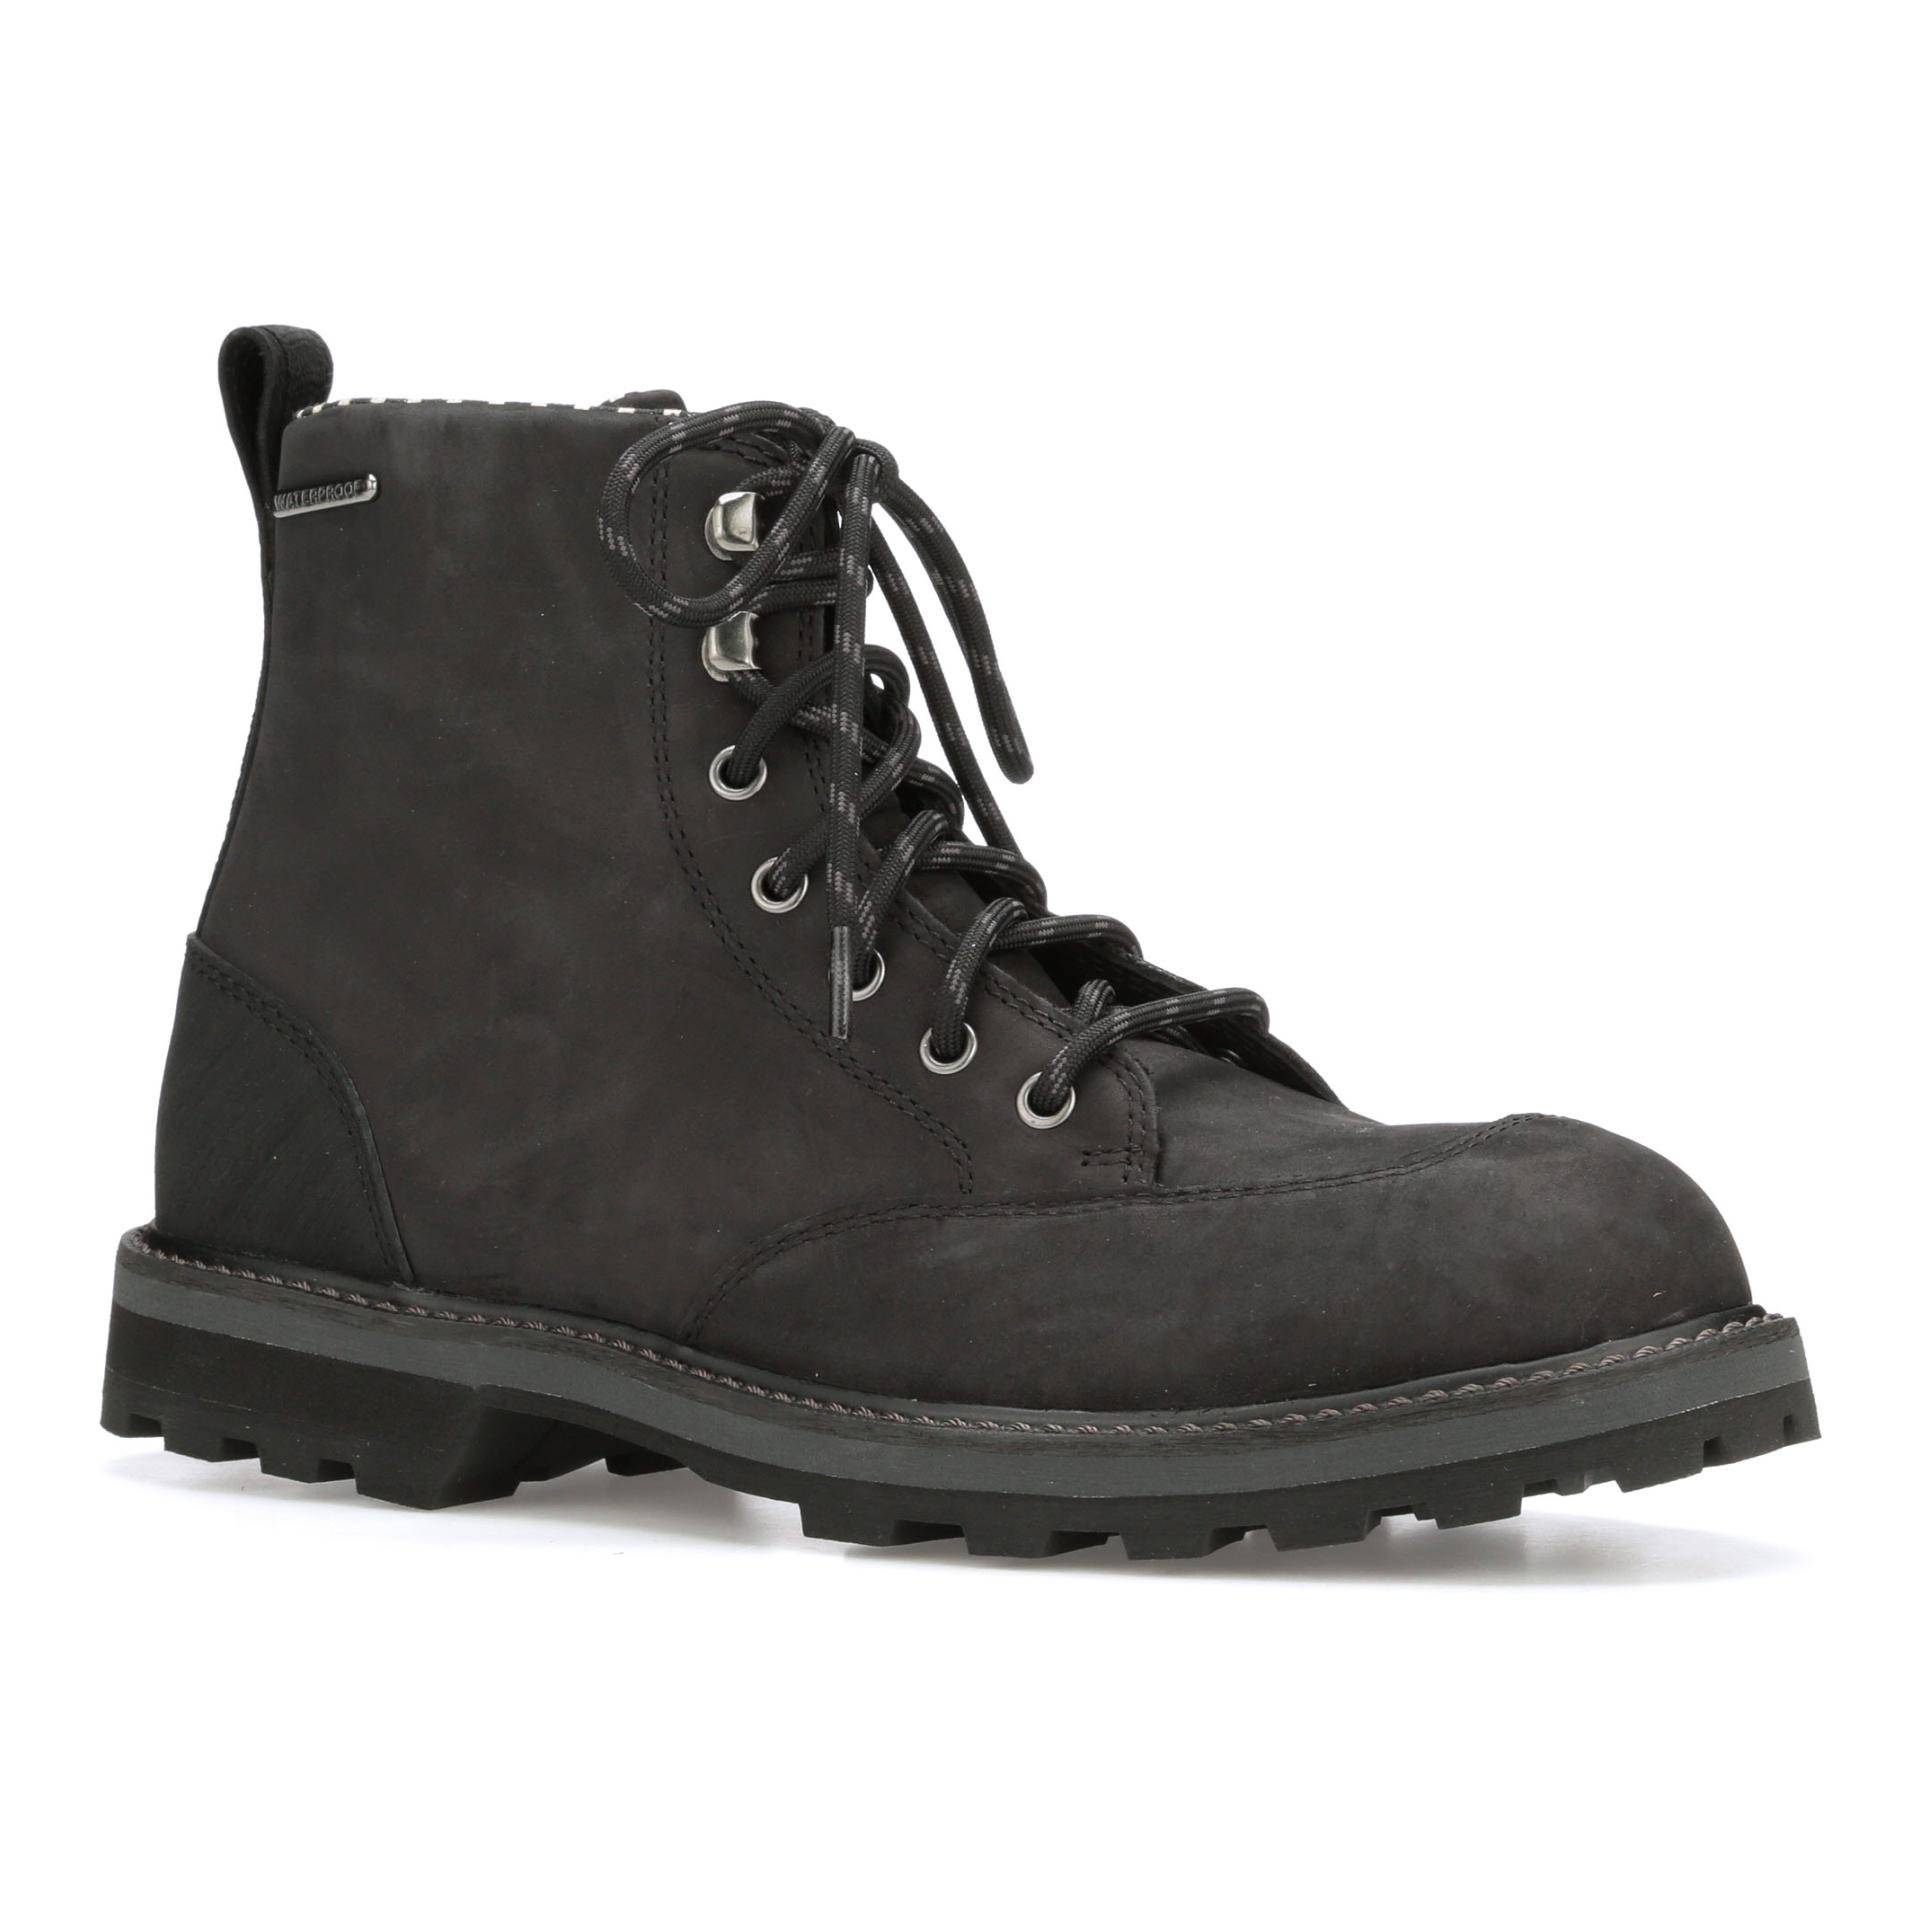 The Original Muck Boot Company Stiefel Foreman Schwarz    43   Grösse: 43 von The Original Muck Boot Company